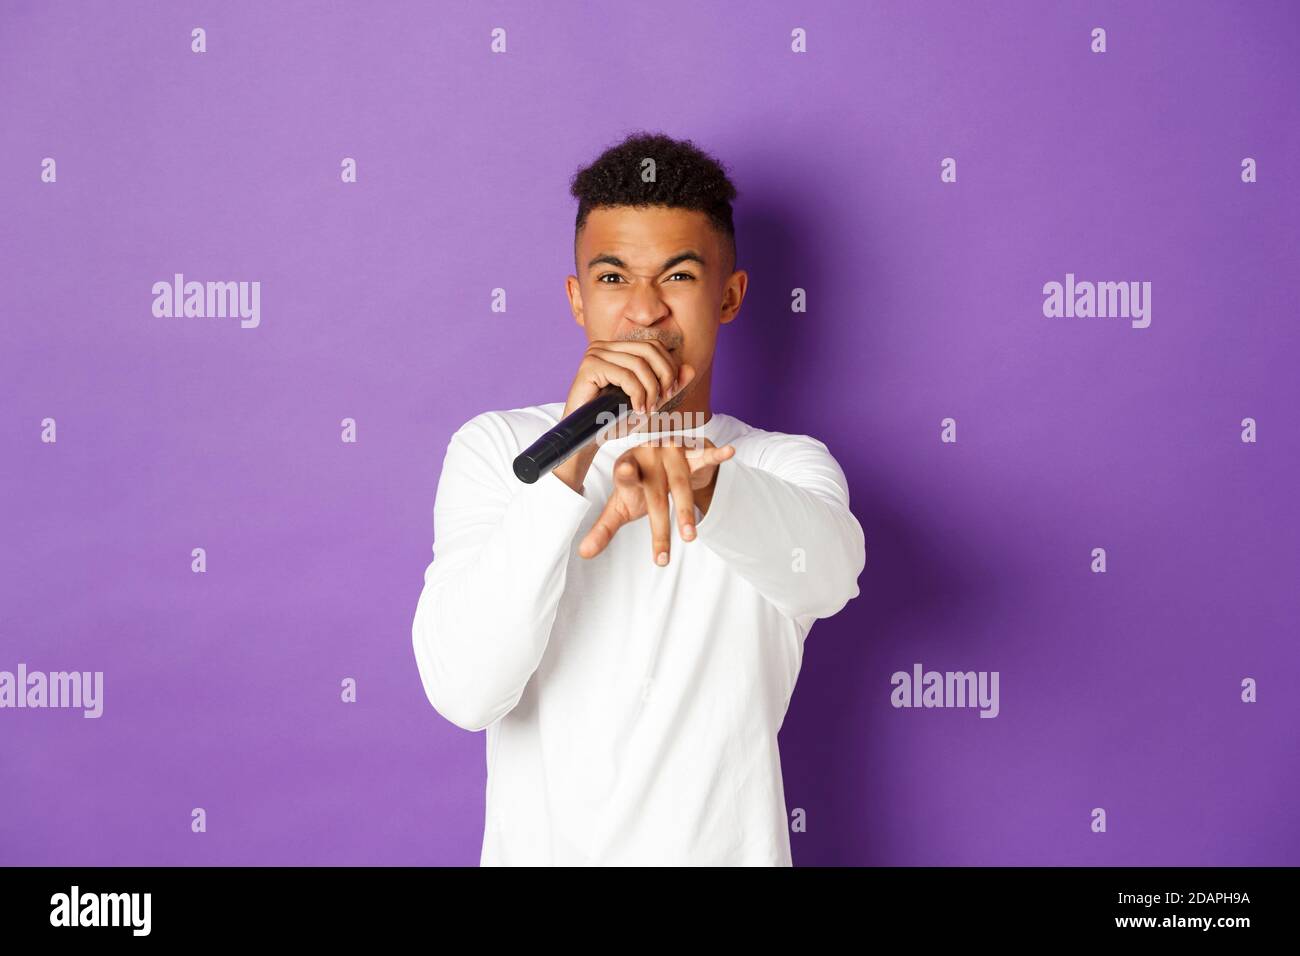 Image of sassy african-american guy singing in microphone, rapping and pointing at camera, standing over purple background Stock Photo